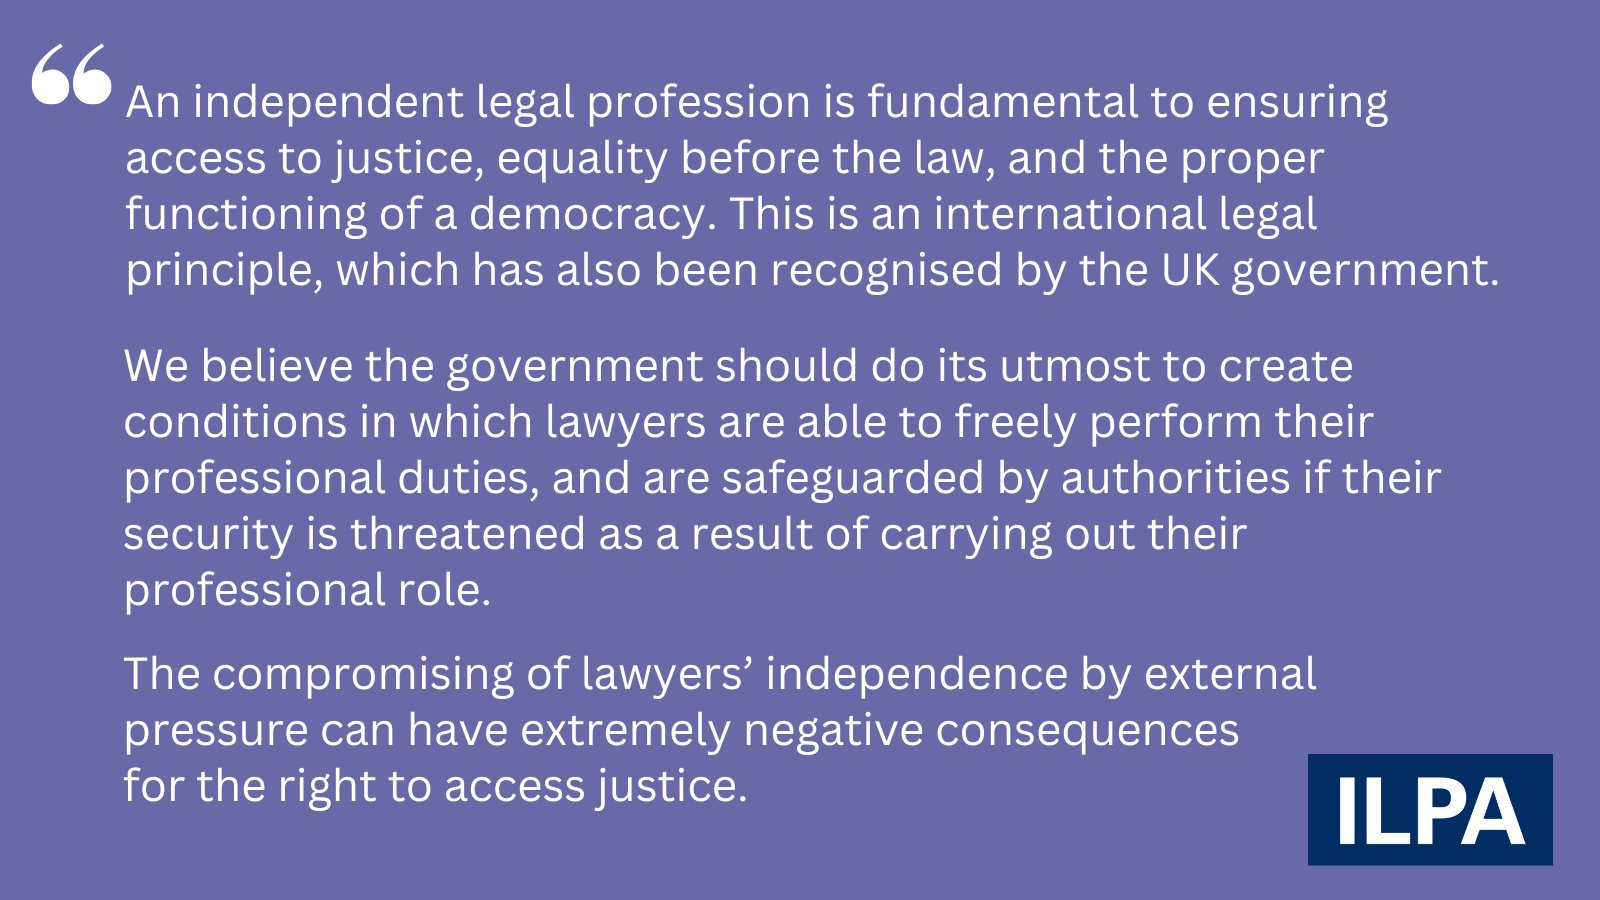 Immigration Law Practitioner’s Association statement on the Safety and Protection of Immigration Practitioners